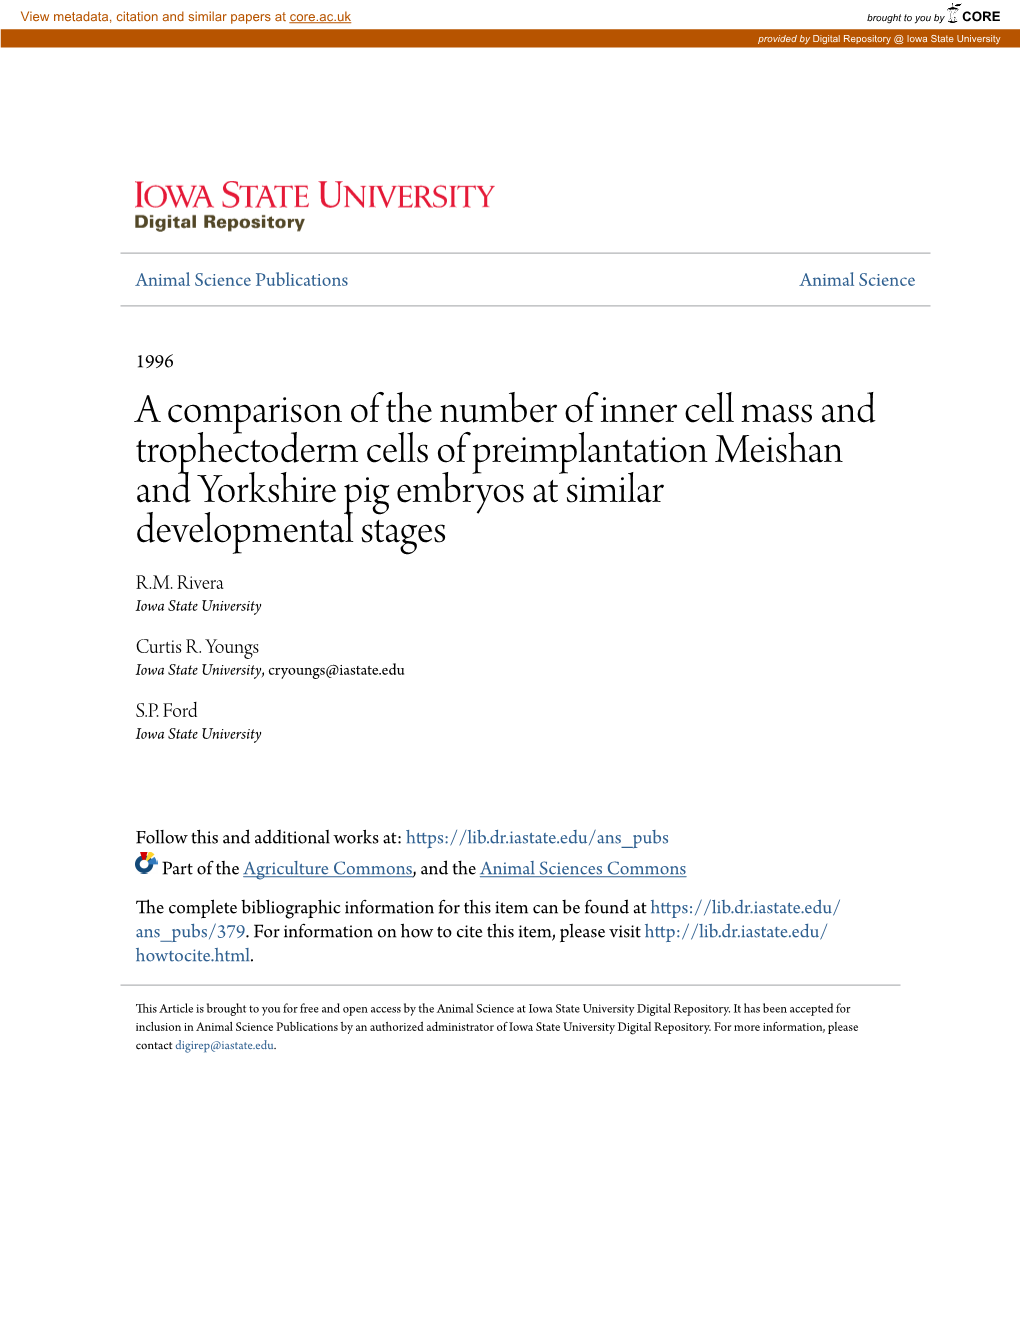 A Comparison of the Number of Inner Cell Mass and Trophectoderm Cells of Preimplantation Meishan and Yorkshire Pig Embryos at Similar Developmental Stages R.M